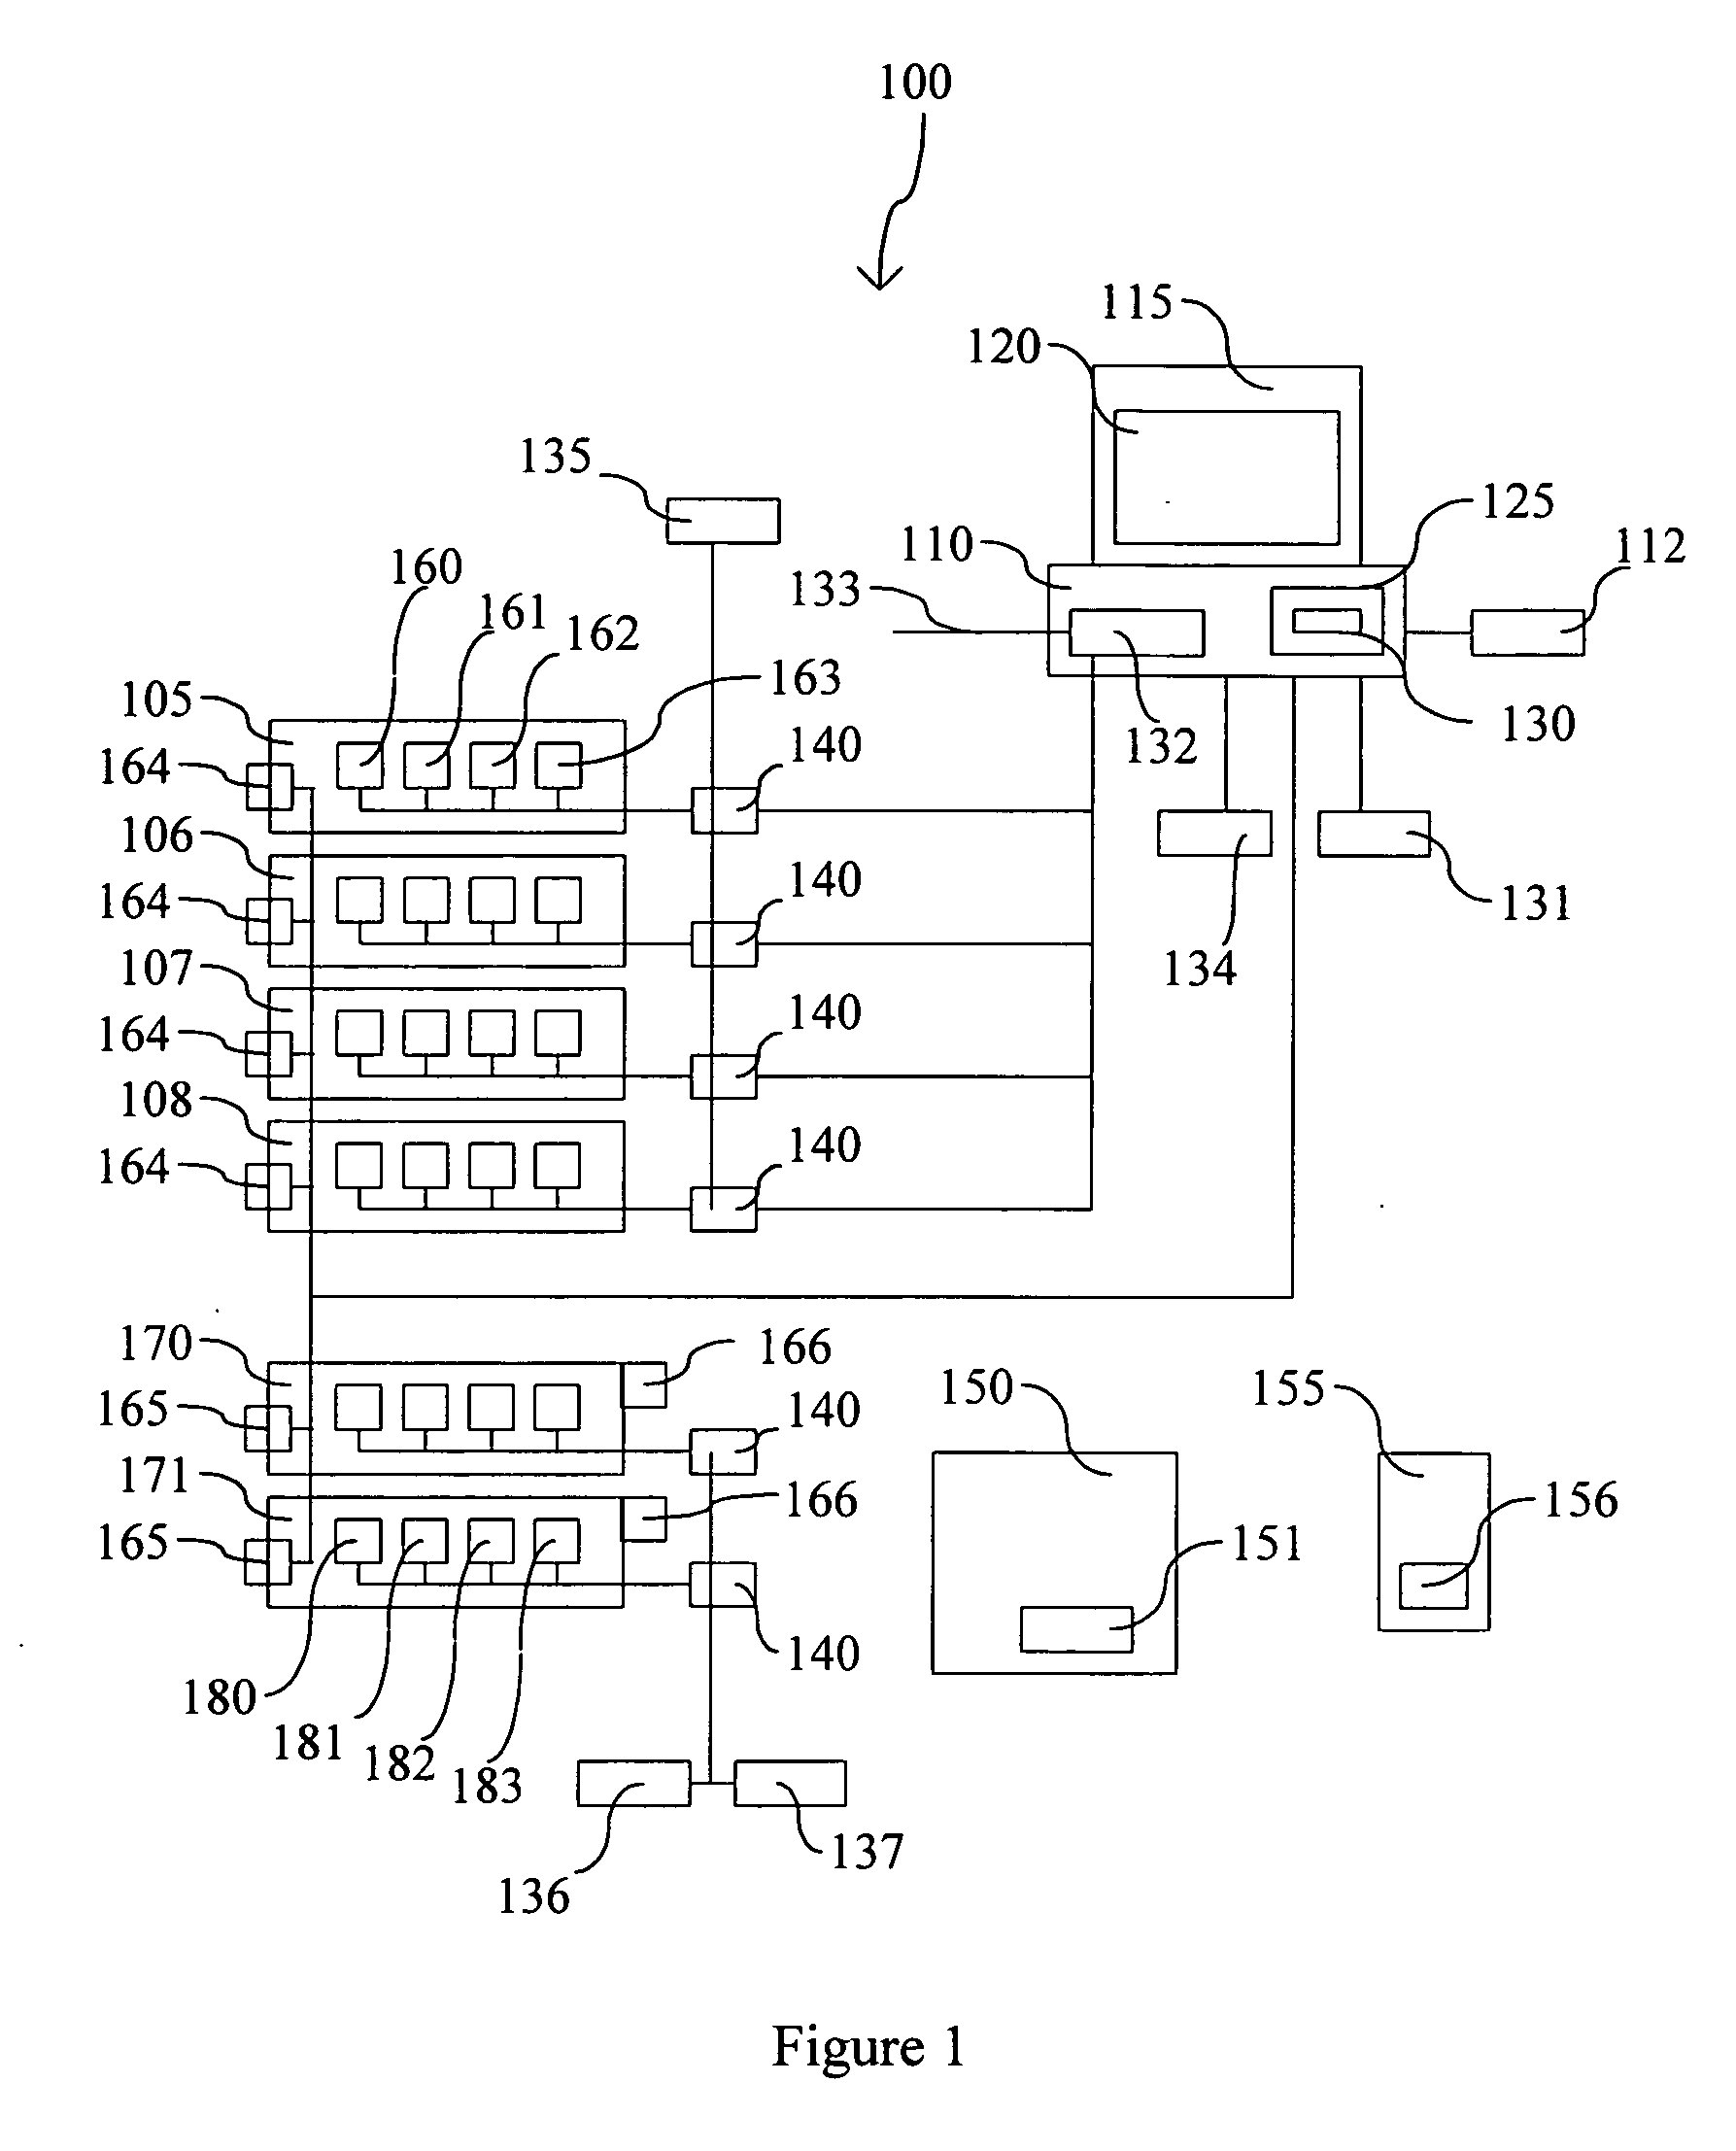 Process and device for recharging portable electronic devices